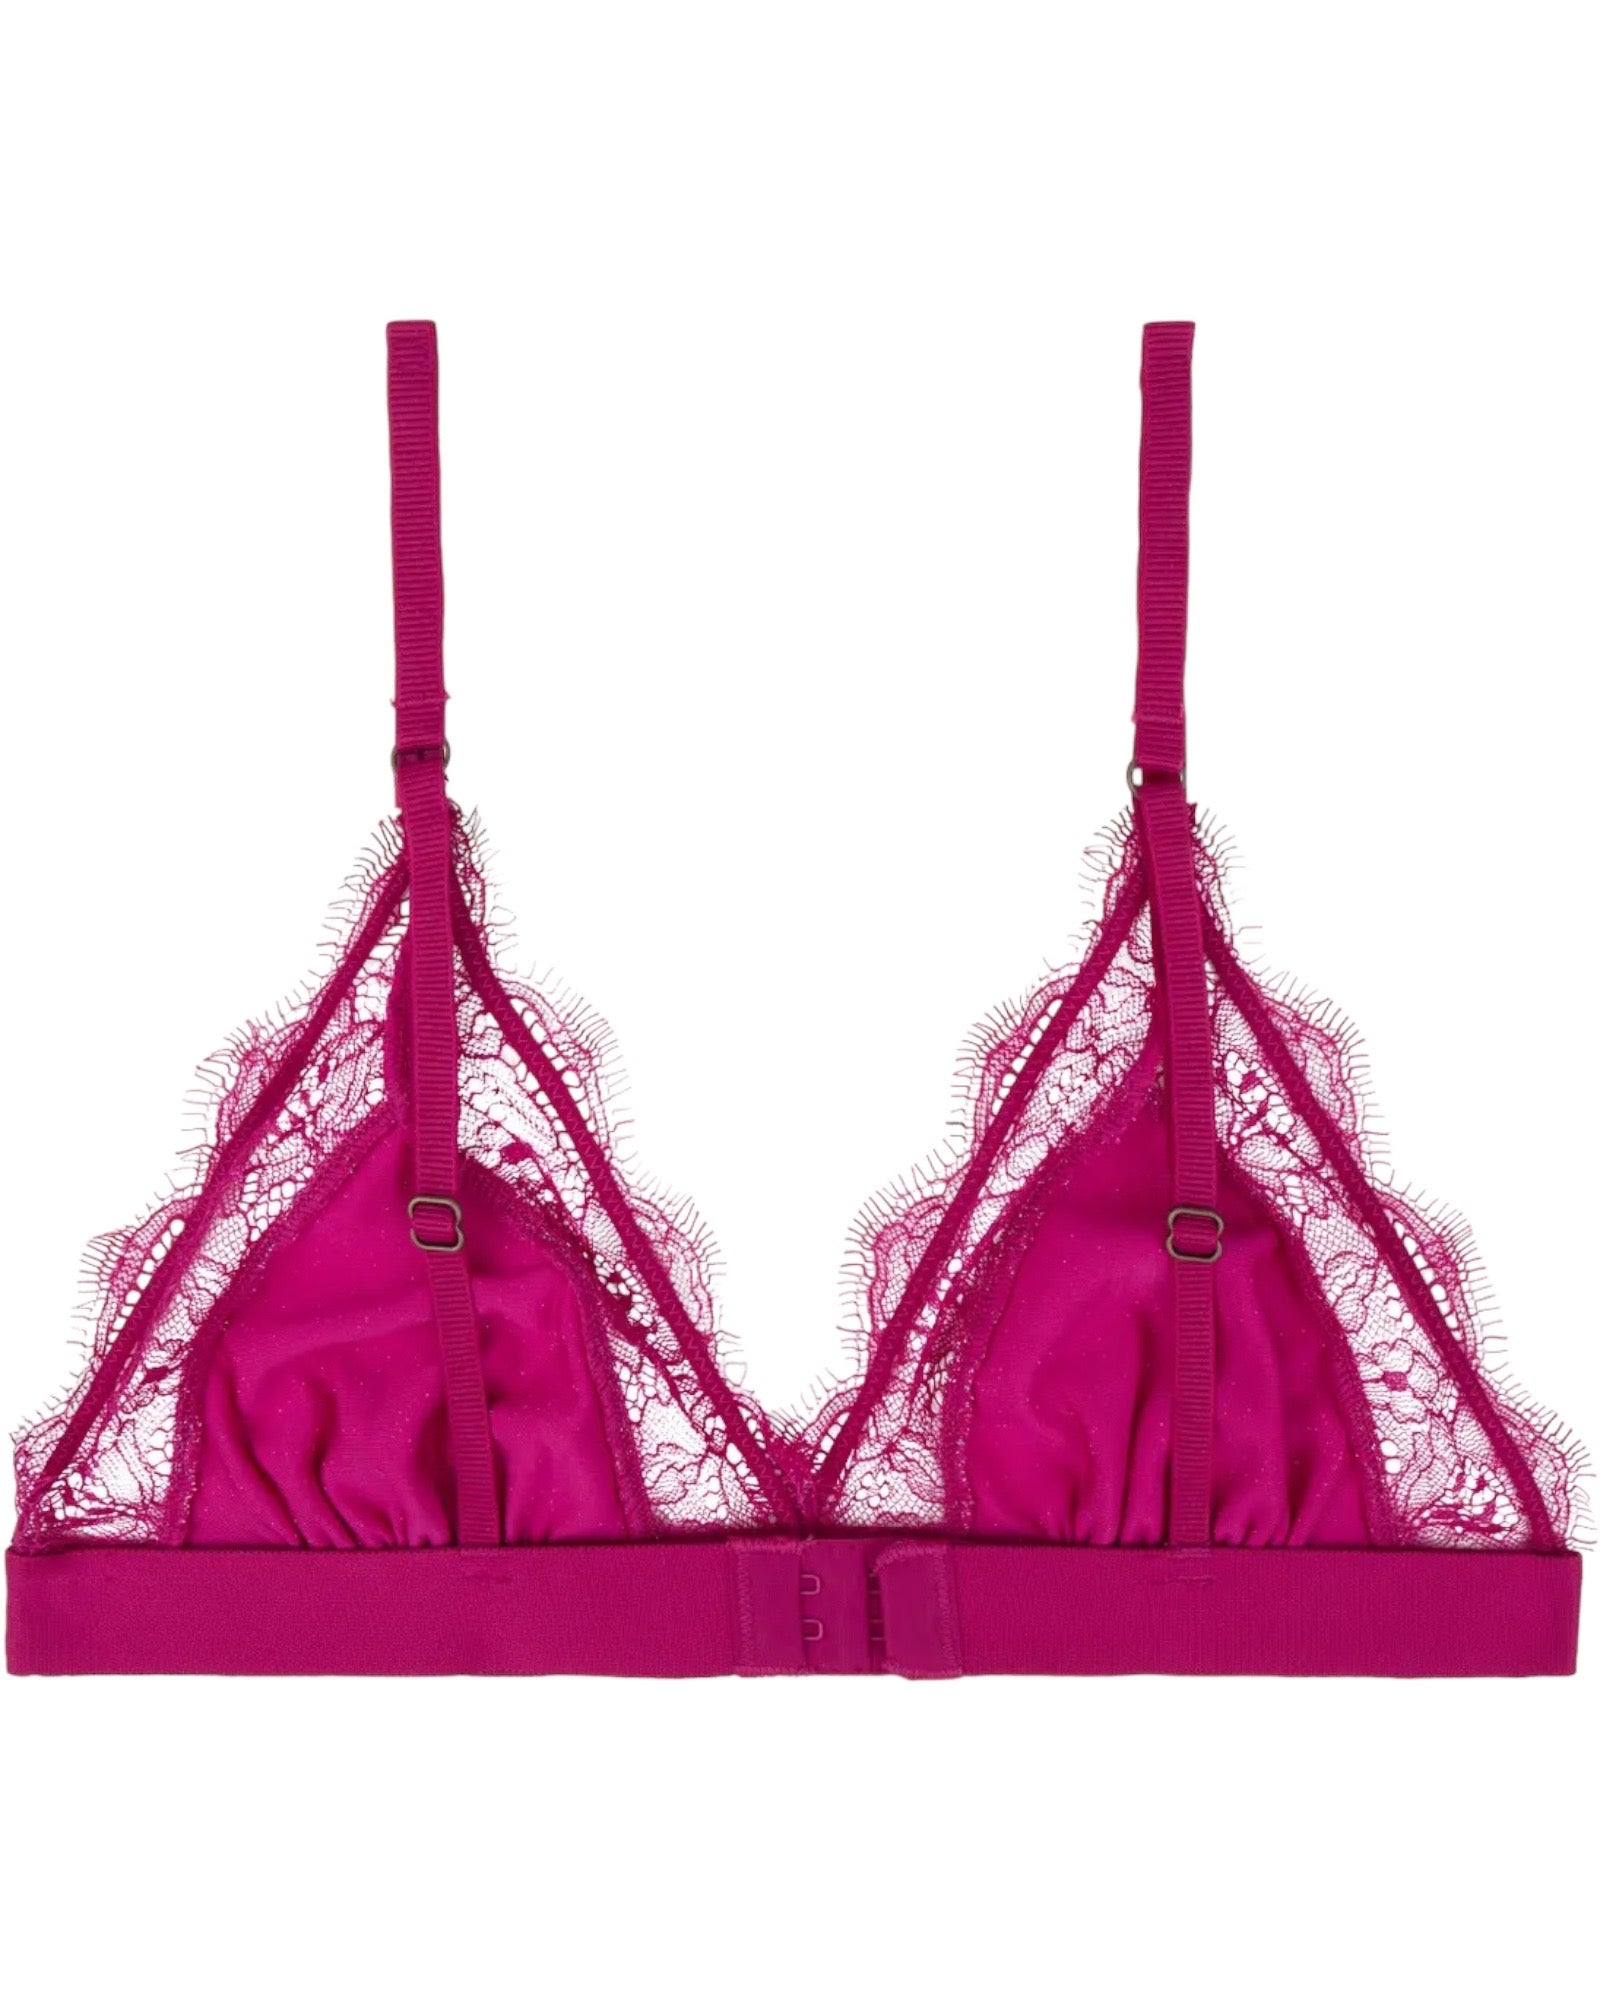 Love Lace - Hot Pink